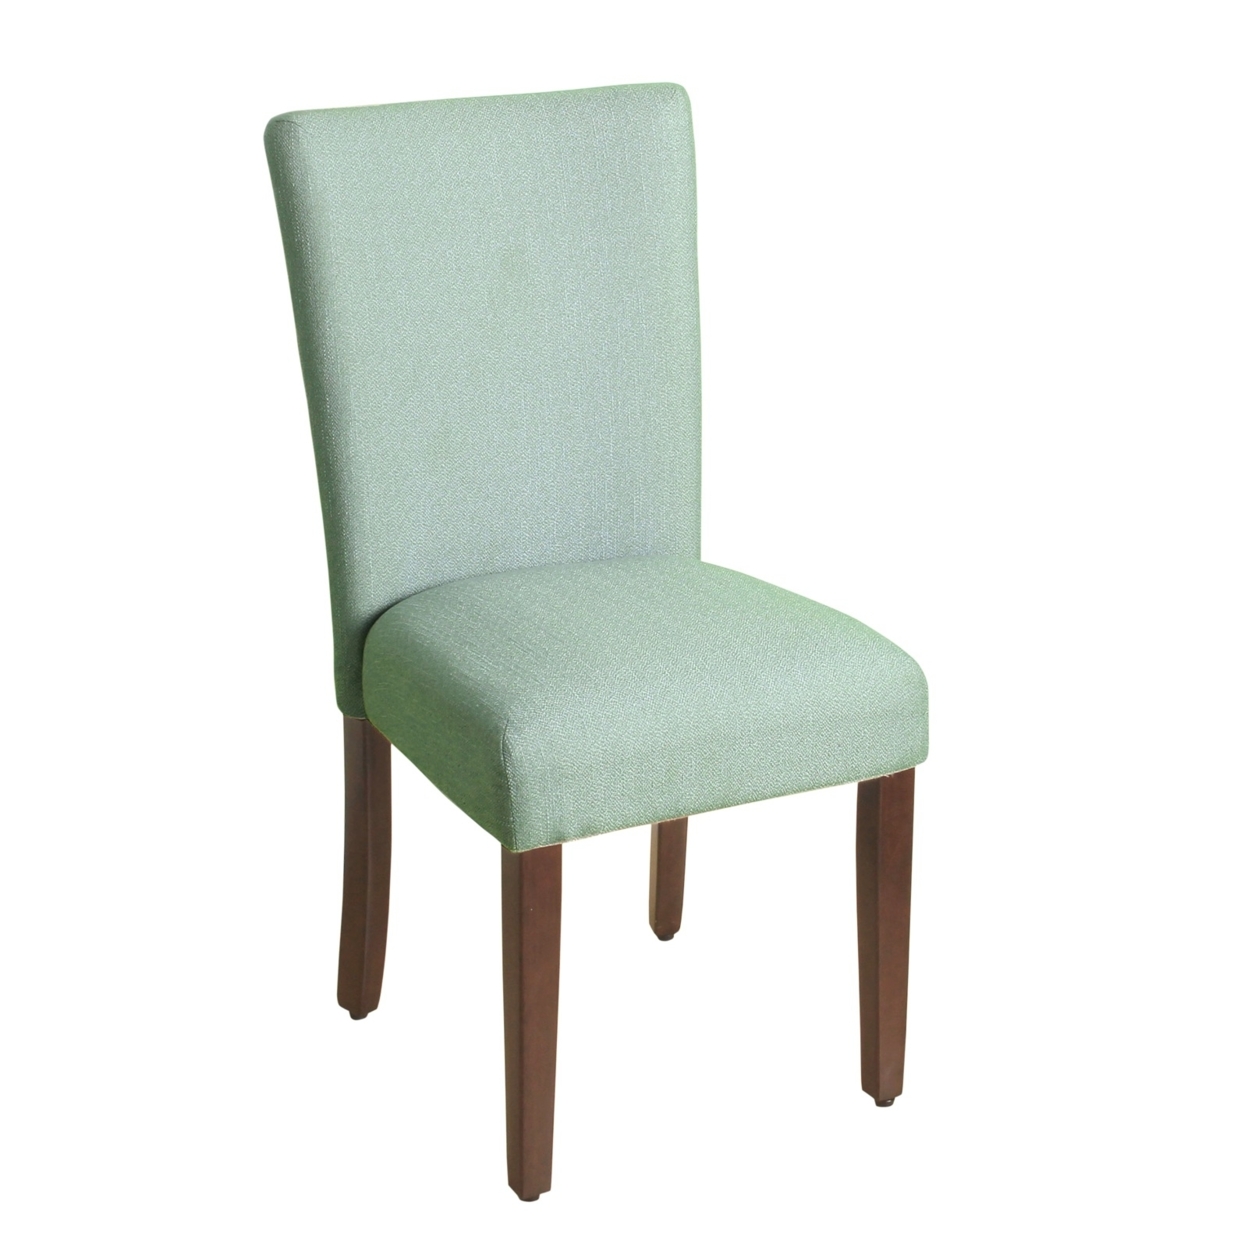 Fabric Upholstered Wooden Parson Dining Chair With Splayed Back, Teal Blue And Brown- Saltoro Sherpi